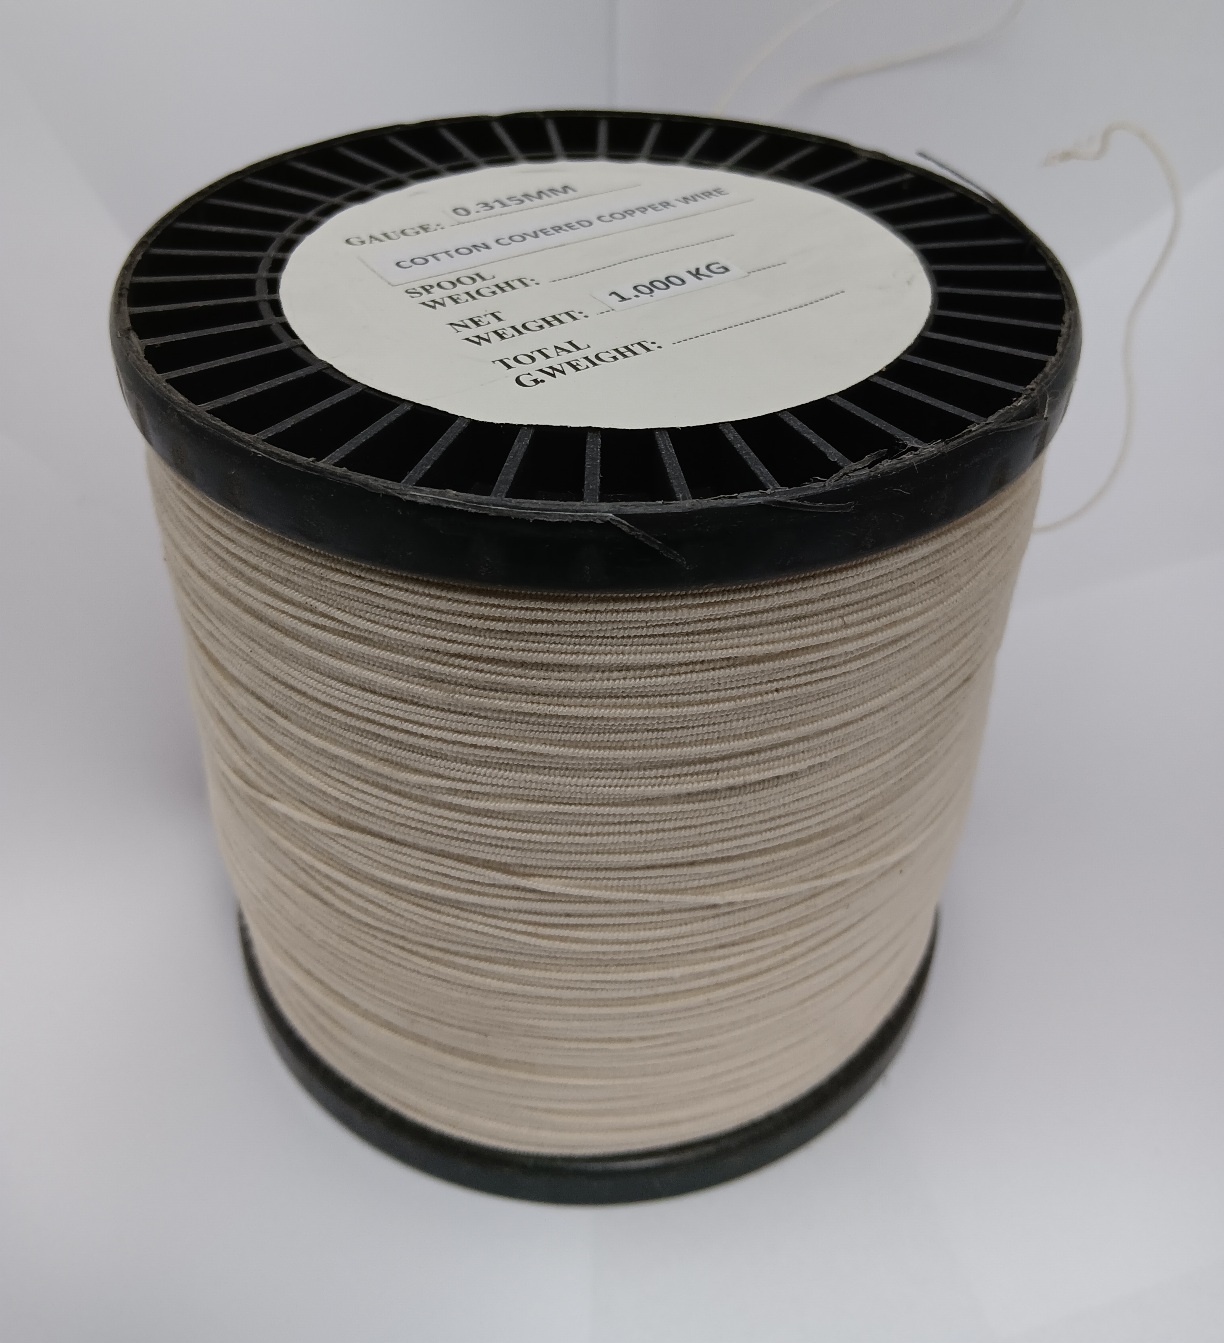 40meters 0.315mm High Build Cotton Covered Copper Craft Wire [0.88mm OD]